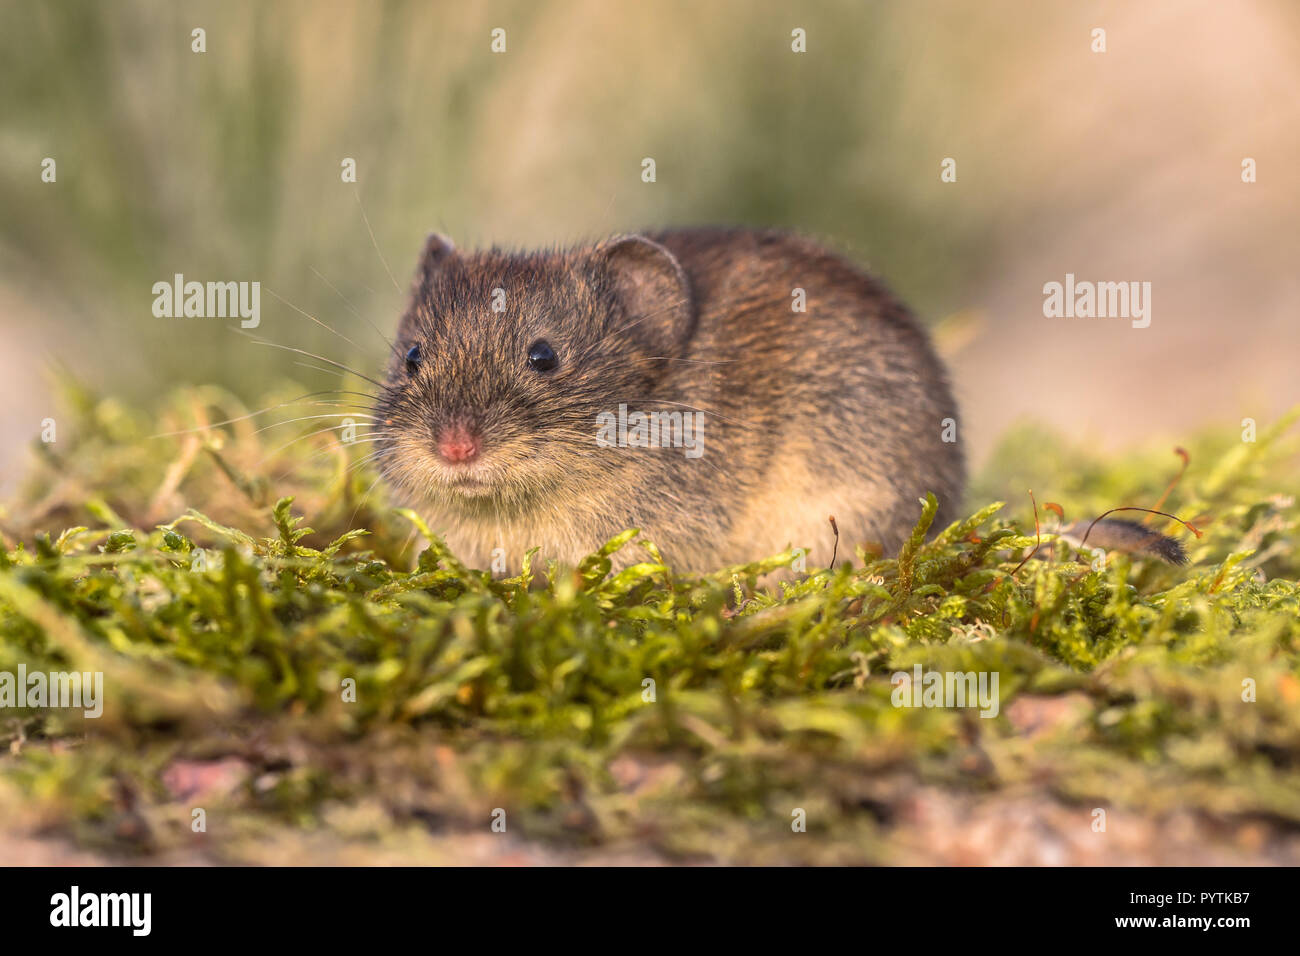 Bank vole (Myodes glareolus; formerly Clethrionomys glareolus). Small vole with red-brown fur looking in natural environment Stock Photo